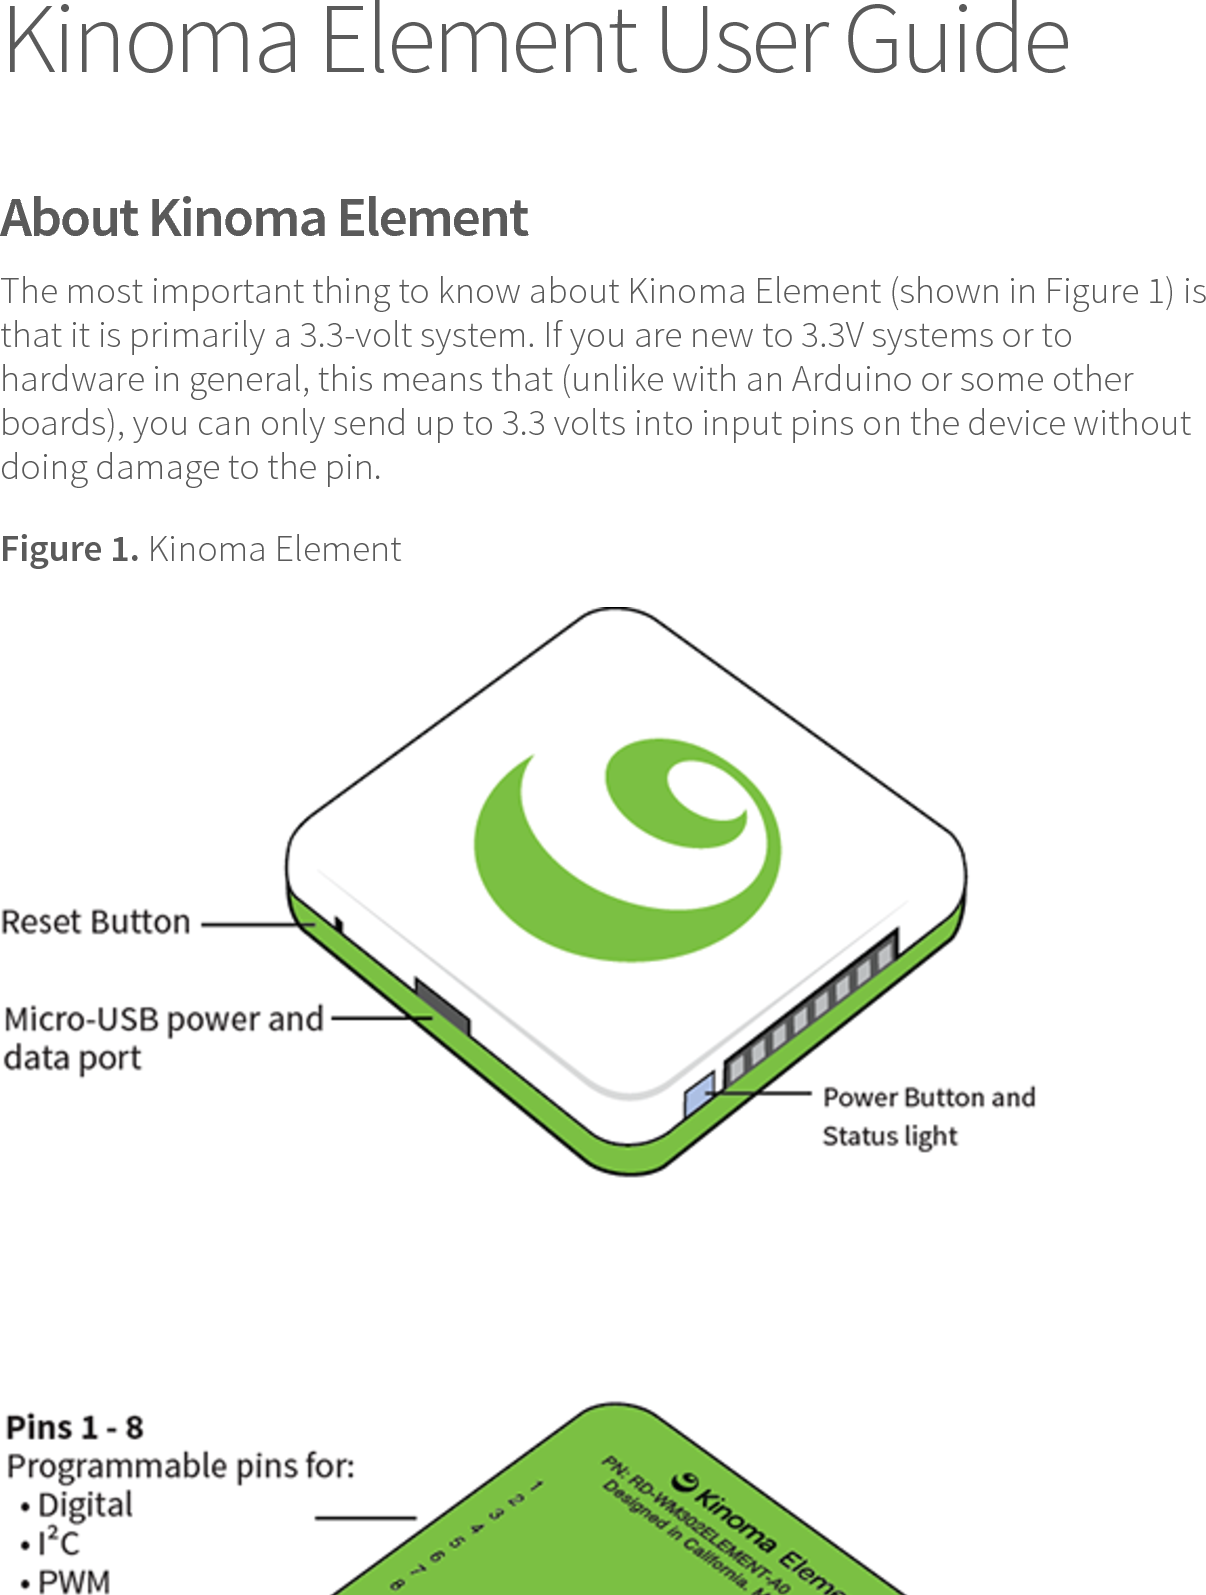 Kinoma Element User GuideAbout Kinoma ElementThe most important thing to know about Kinoma Element (shown in Figure 1) isthat it is primarily a 3.3-volt system. If you are new to 3.3V systems or tohardware in general, this means that (unlike with an Arduino or some otherboards), you can only send up to 3.3 volts into input pins on the device withoutdoing damage to the pin.Figure 1. Kinoma Element